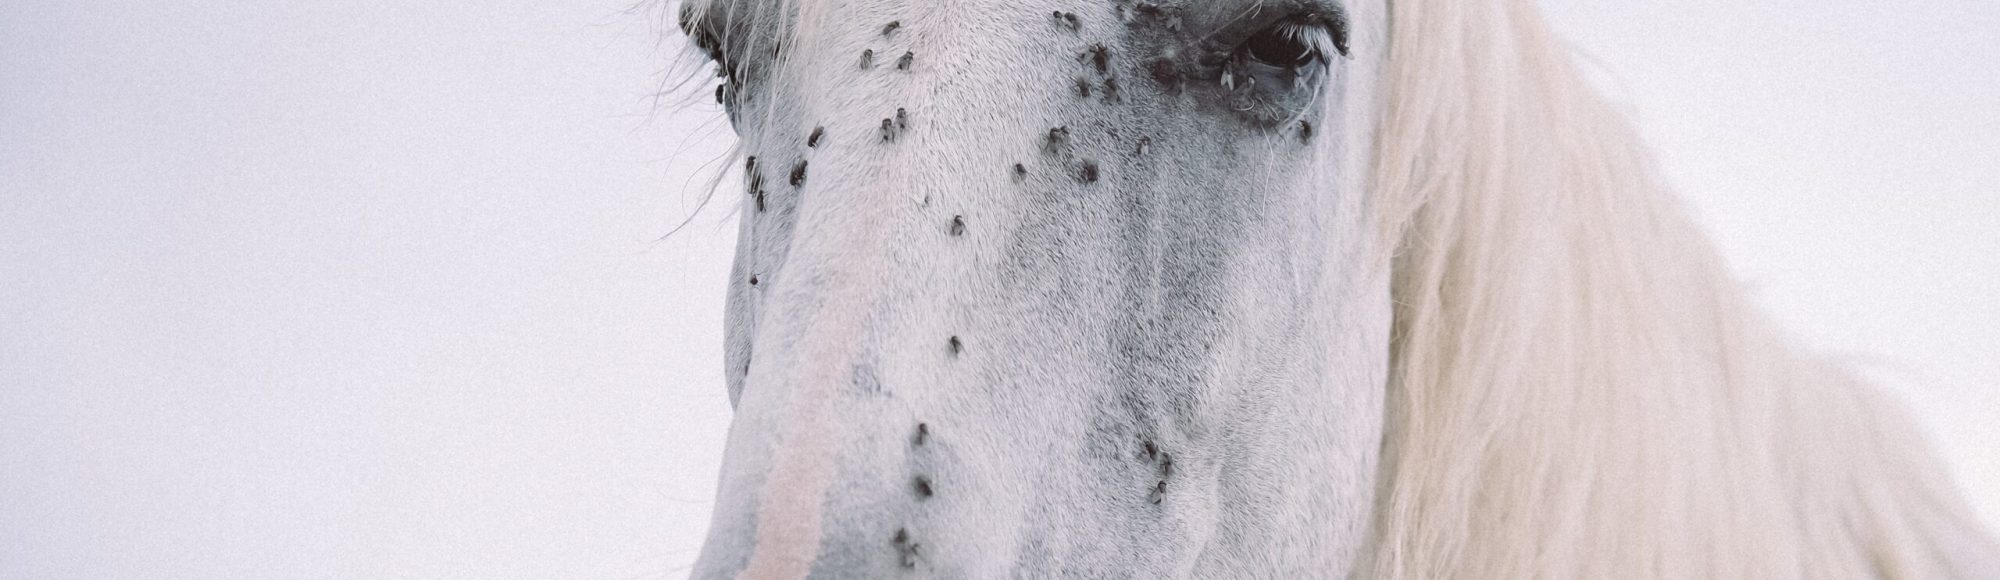 Light Grey horse's head covered in pesky flies around the eyes and nostrils